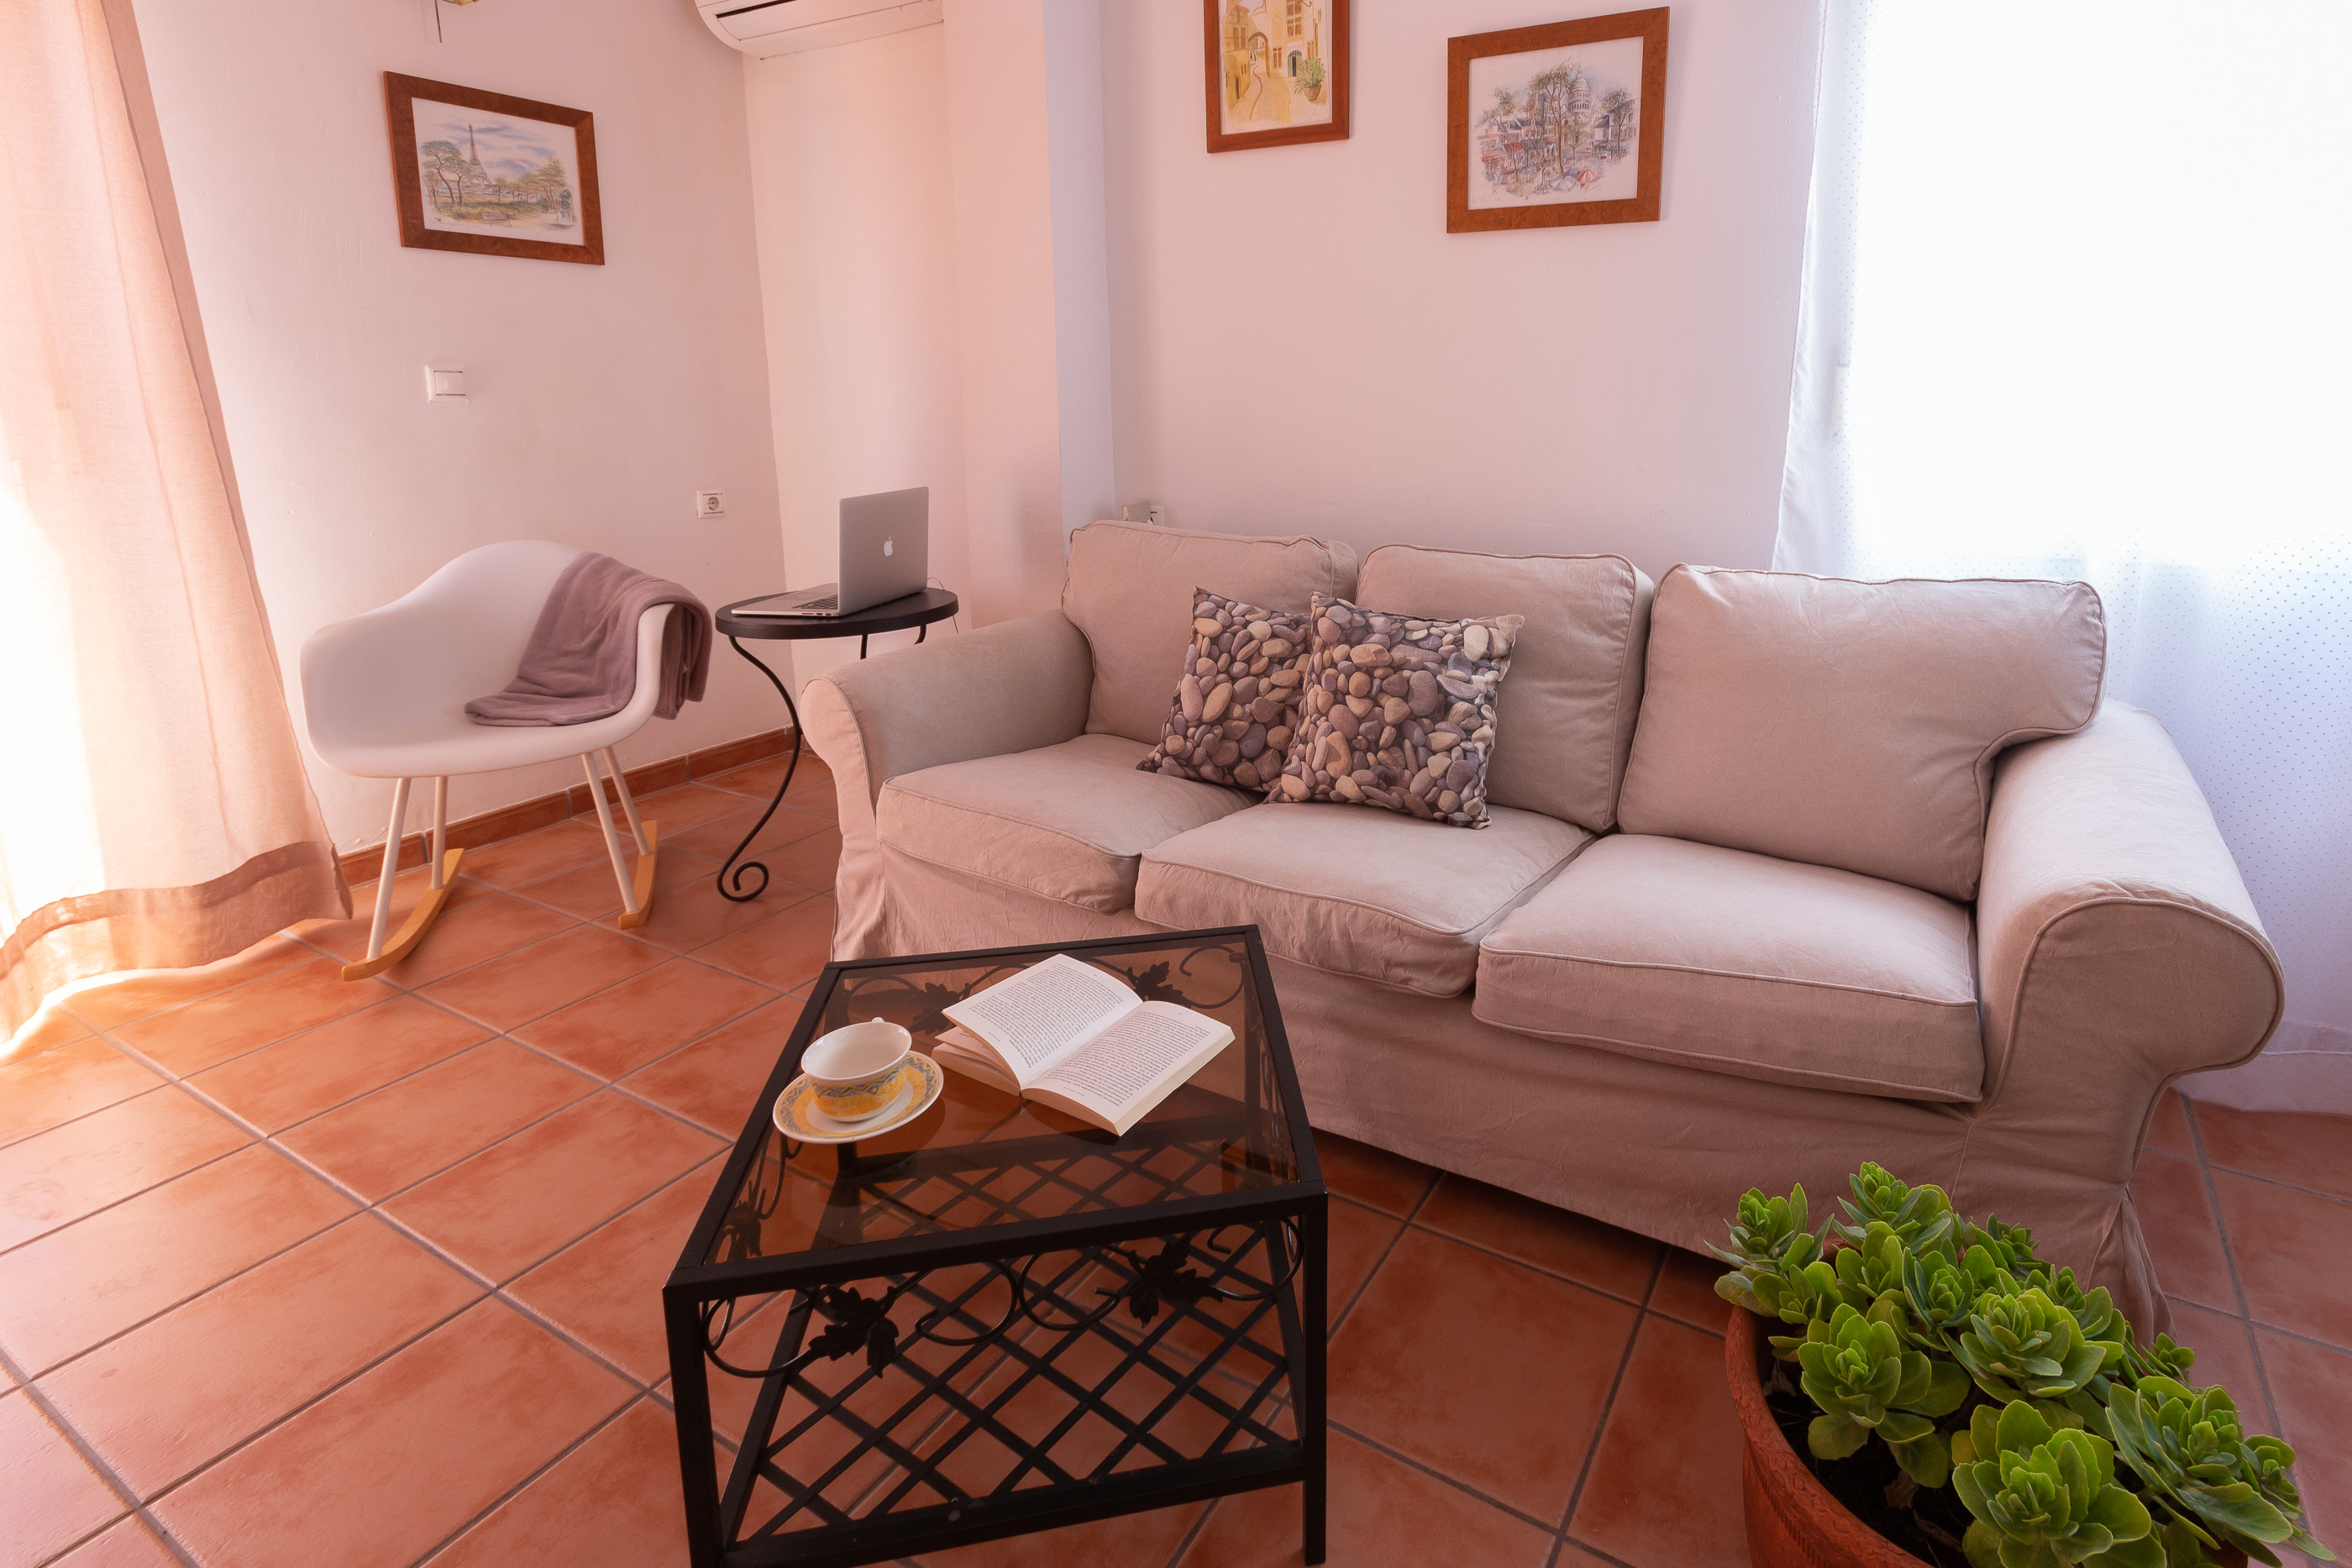 OPPORTUNITY TO ACQUIRE THIS PENTHOUSE IN THE CENTER OF CALPE WITH 2 BEDROOMS